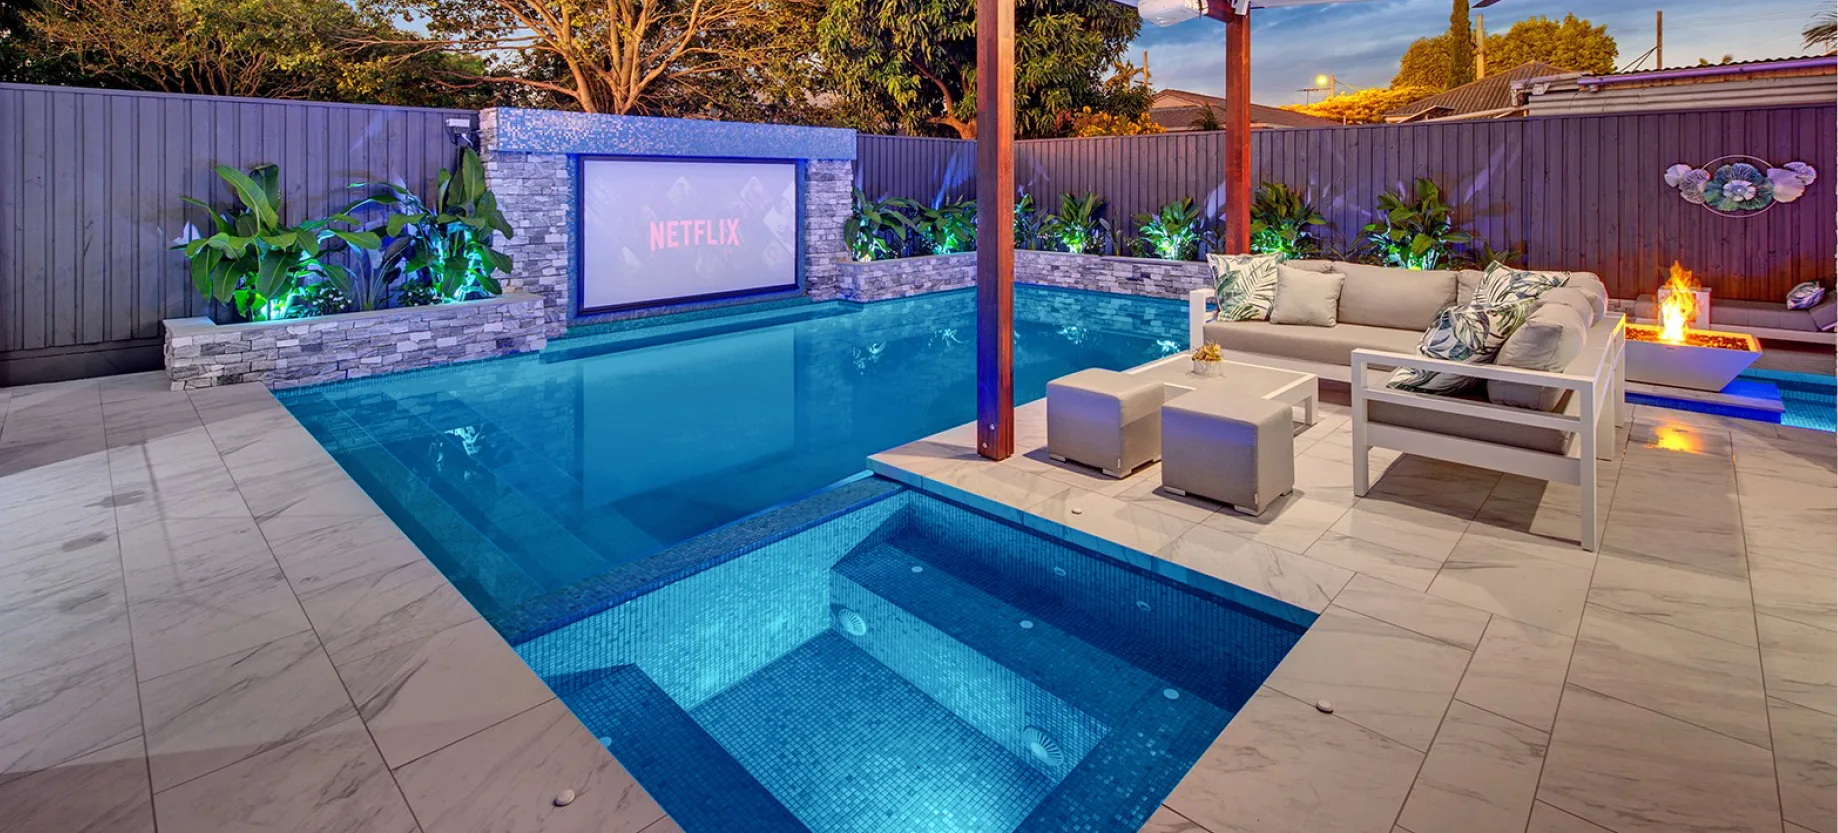 Australias Best Pools best entertaining lifestyle swimming pool by night